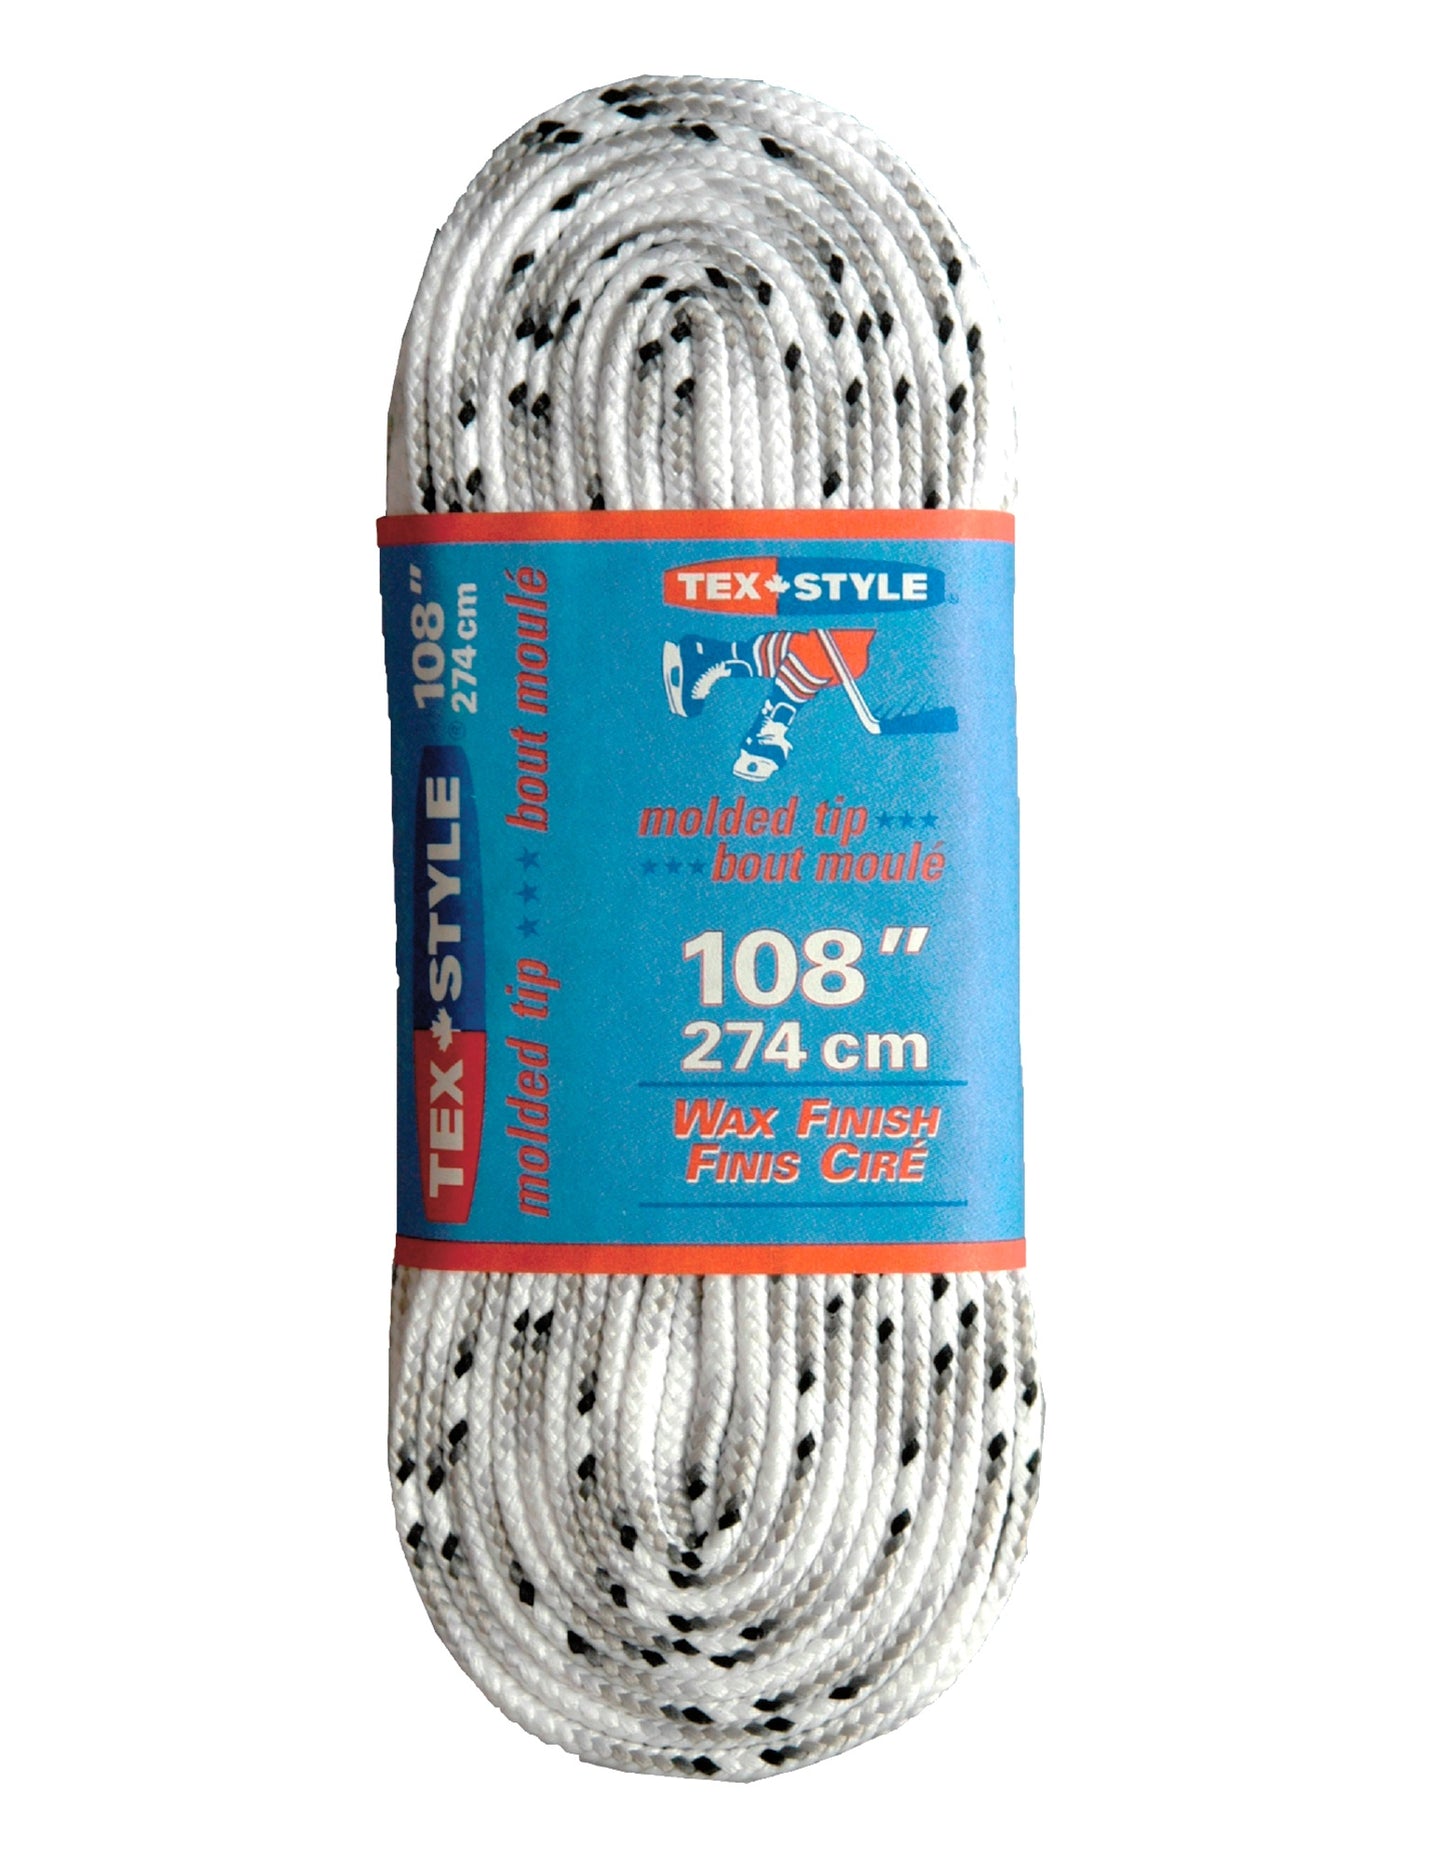 TEX-STYLE hockey laces colored waxed (smoke white) 108"